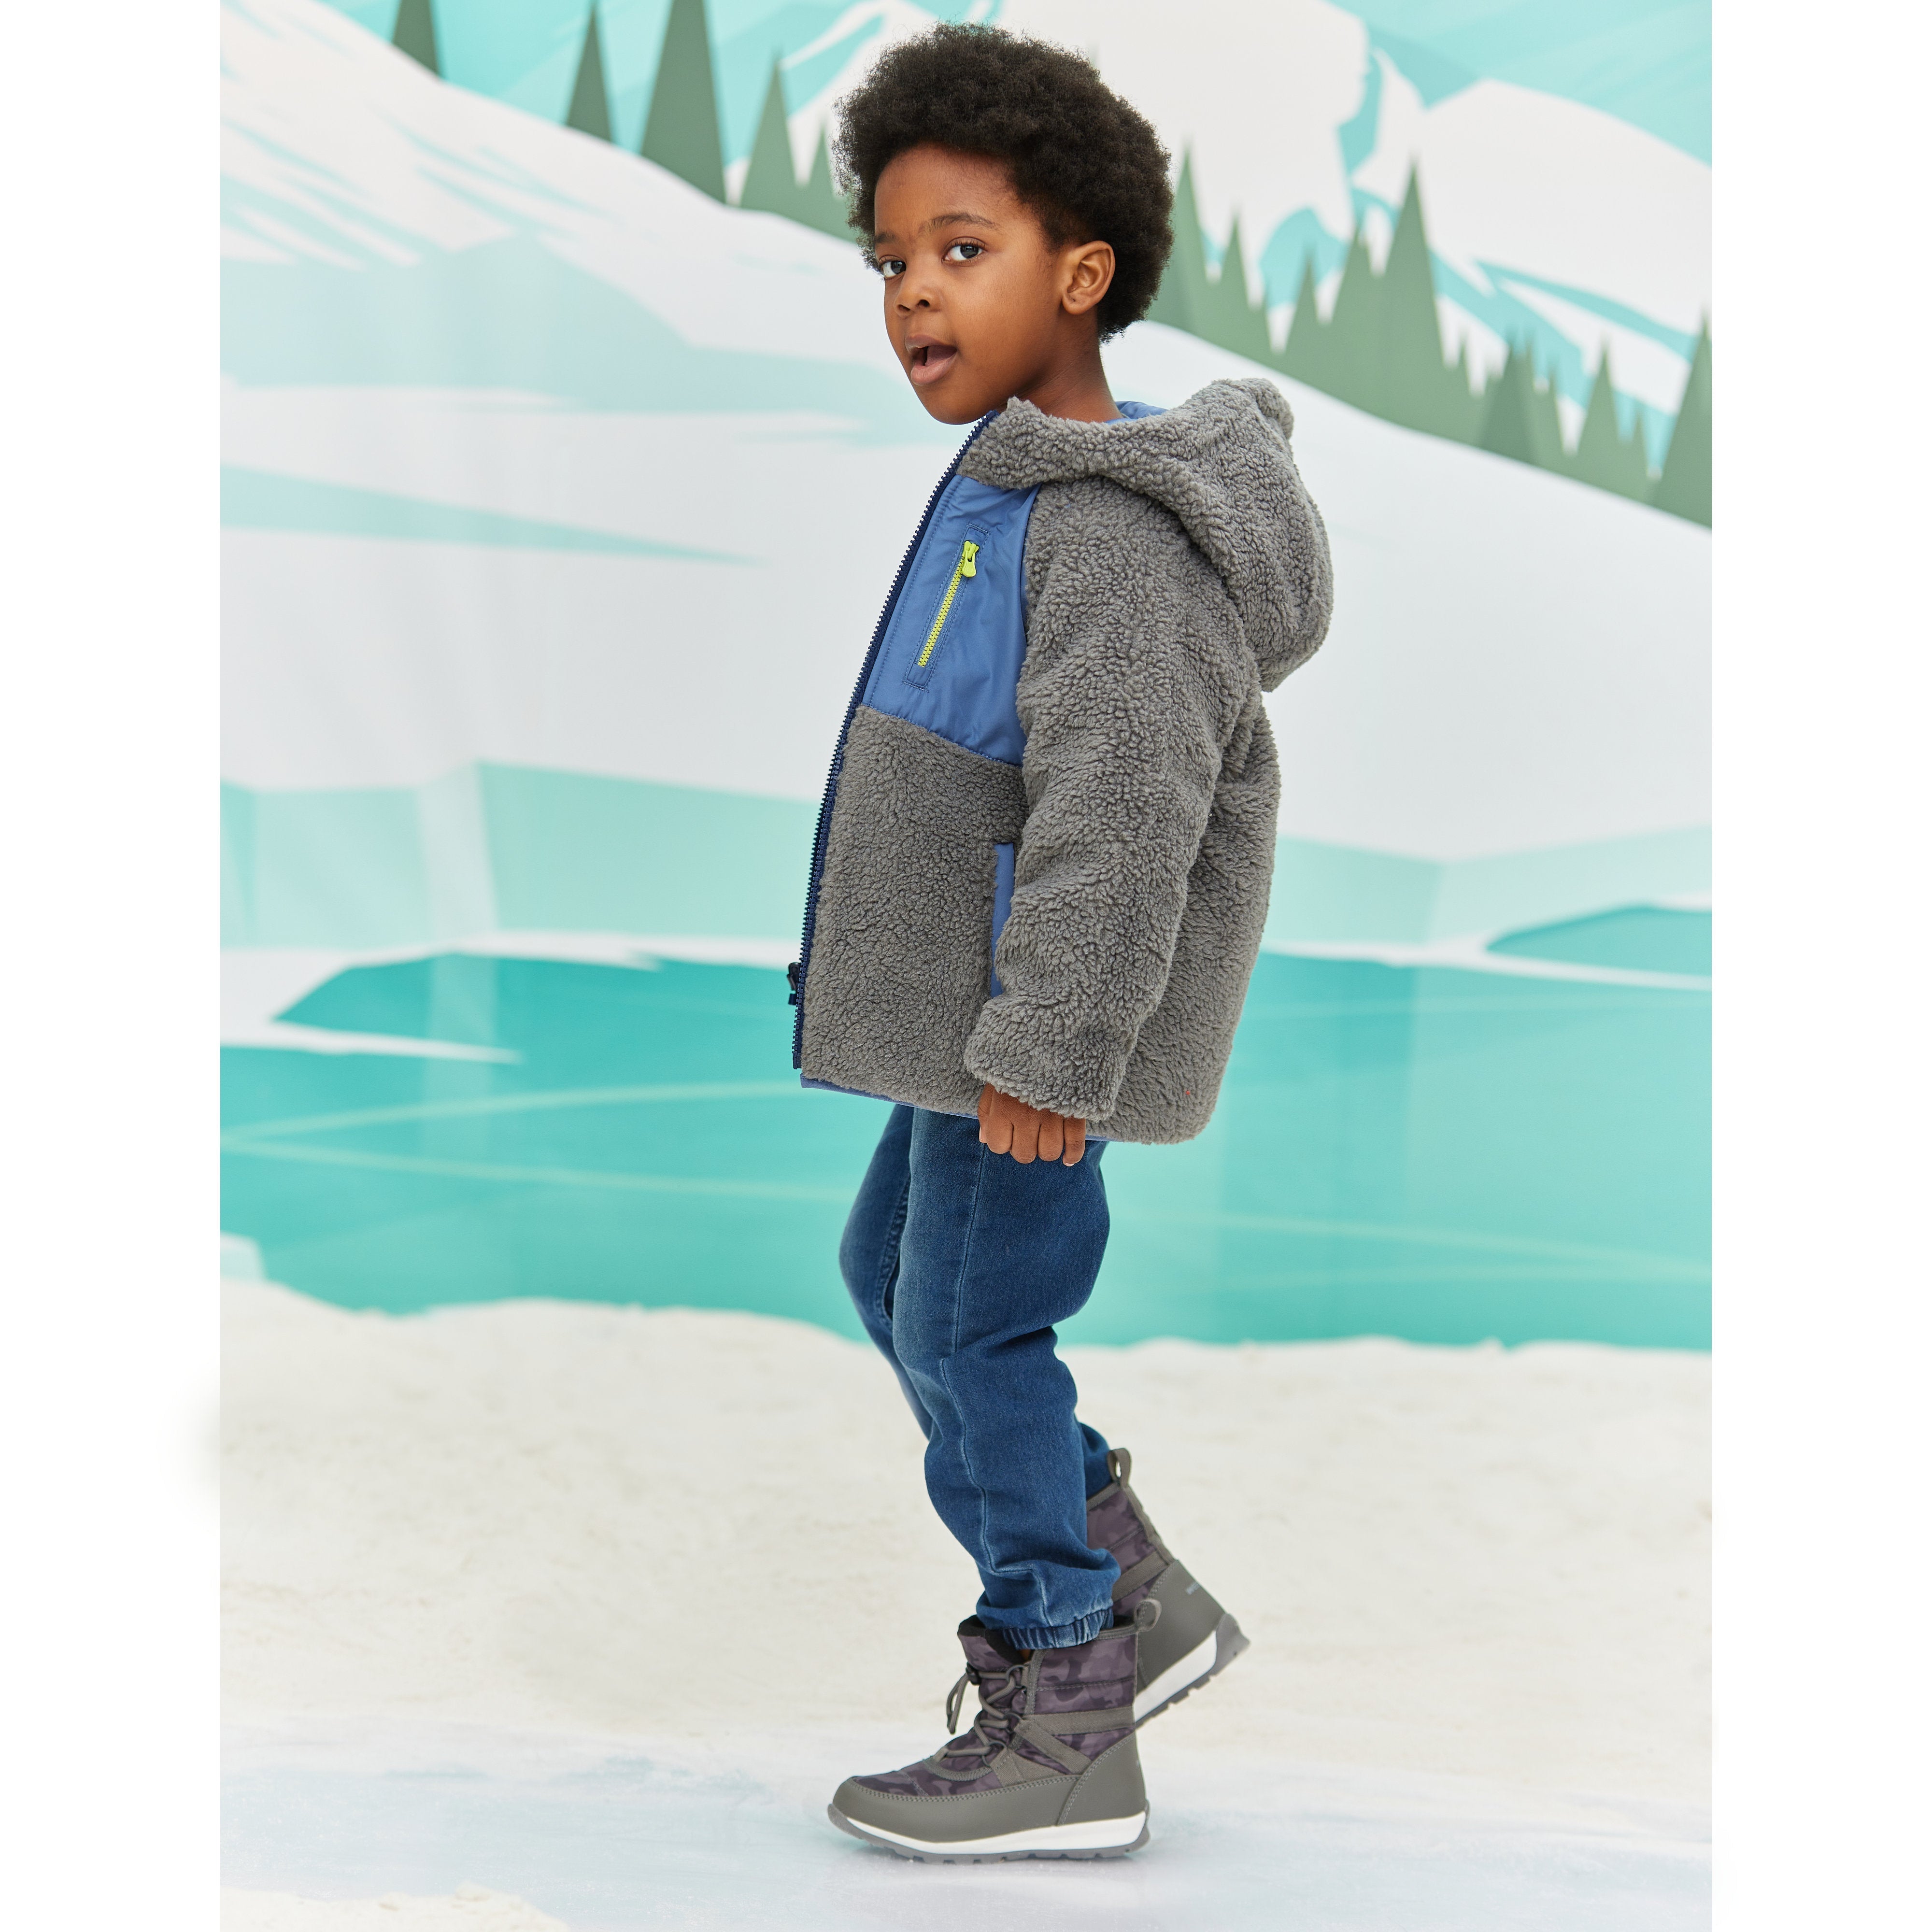 Kids Unisex Daily Snow Boots